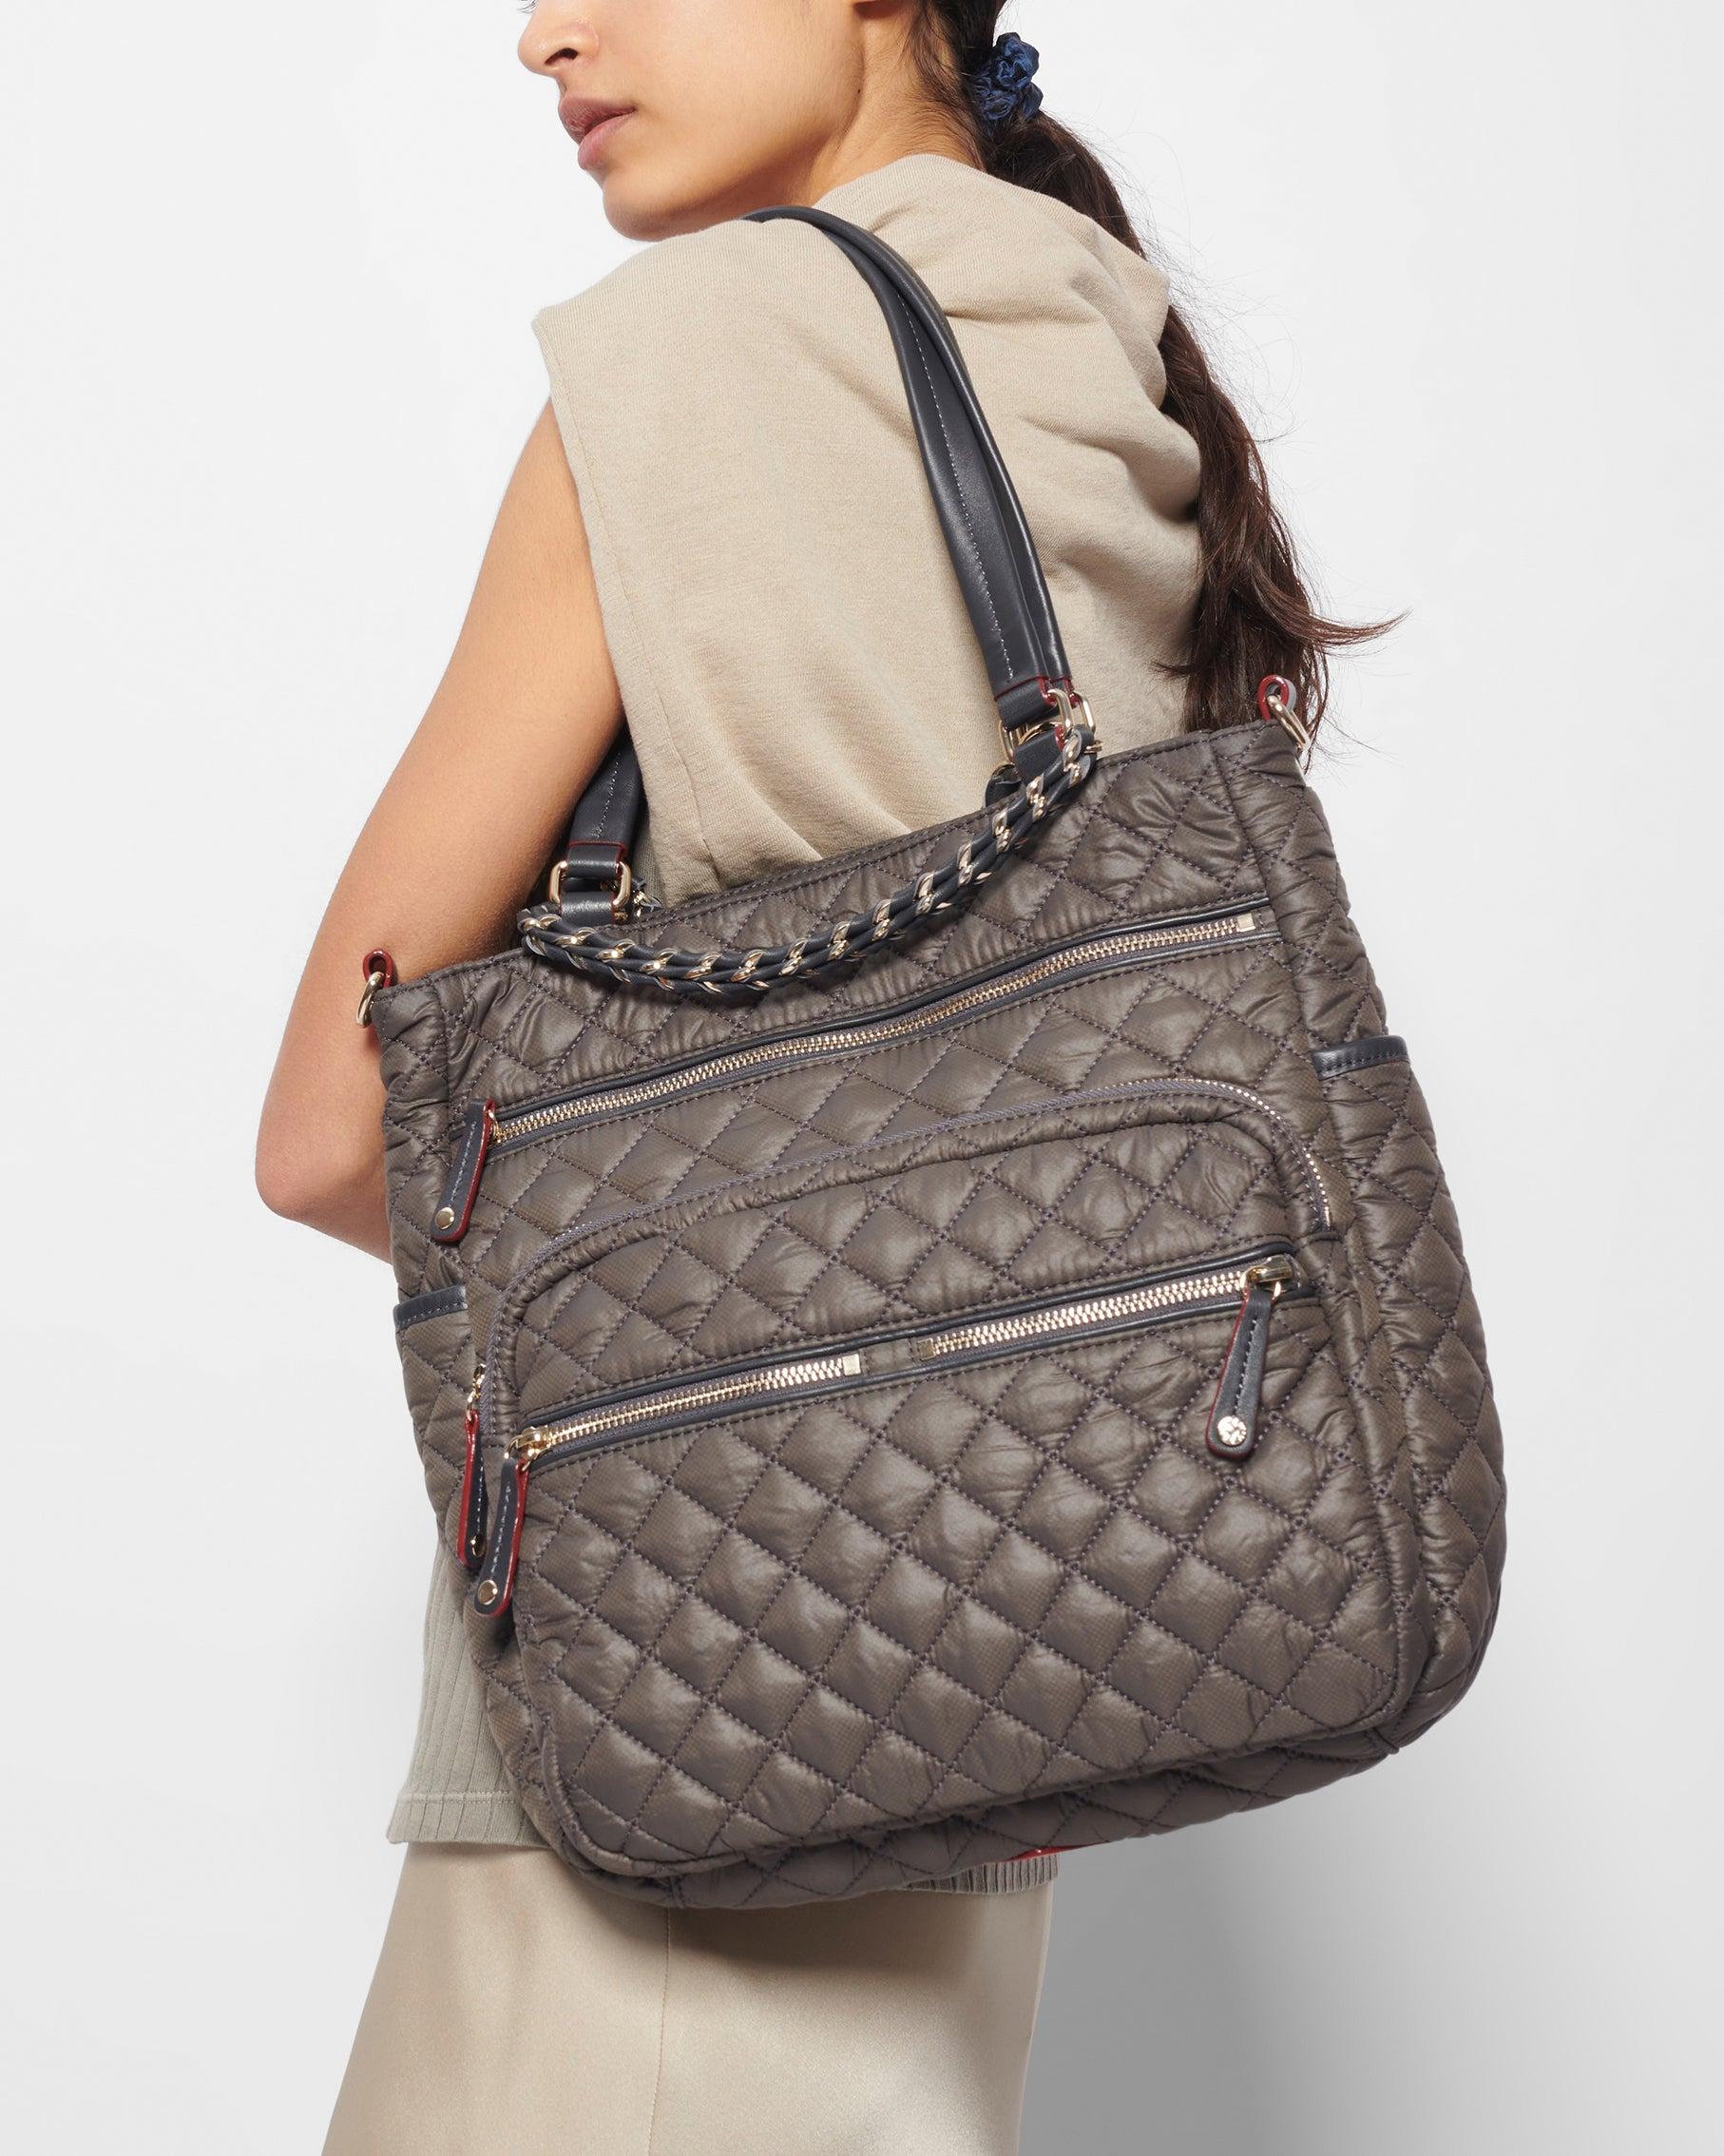 MZ Wallace Magnet Crosby Magazine Tote in Gray